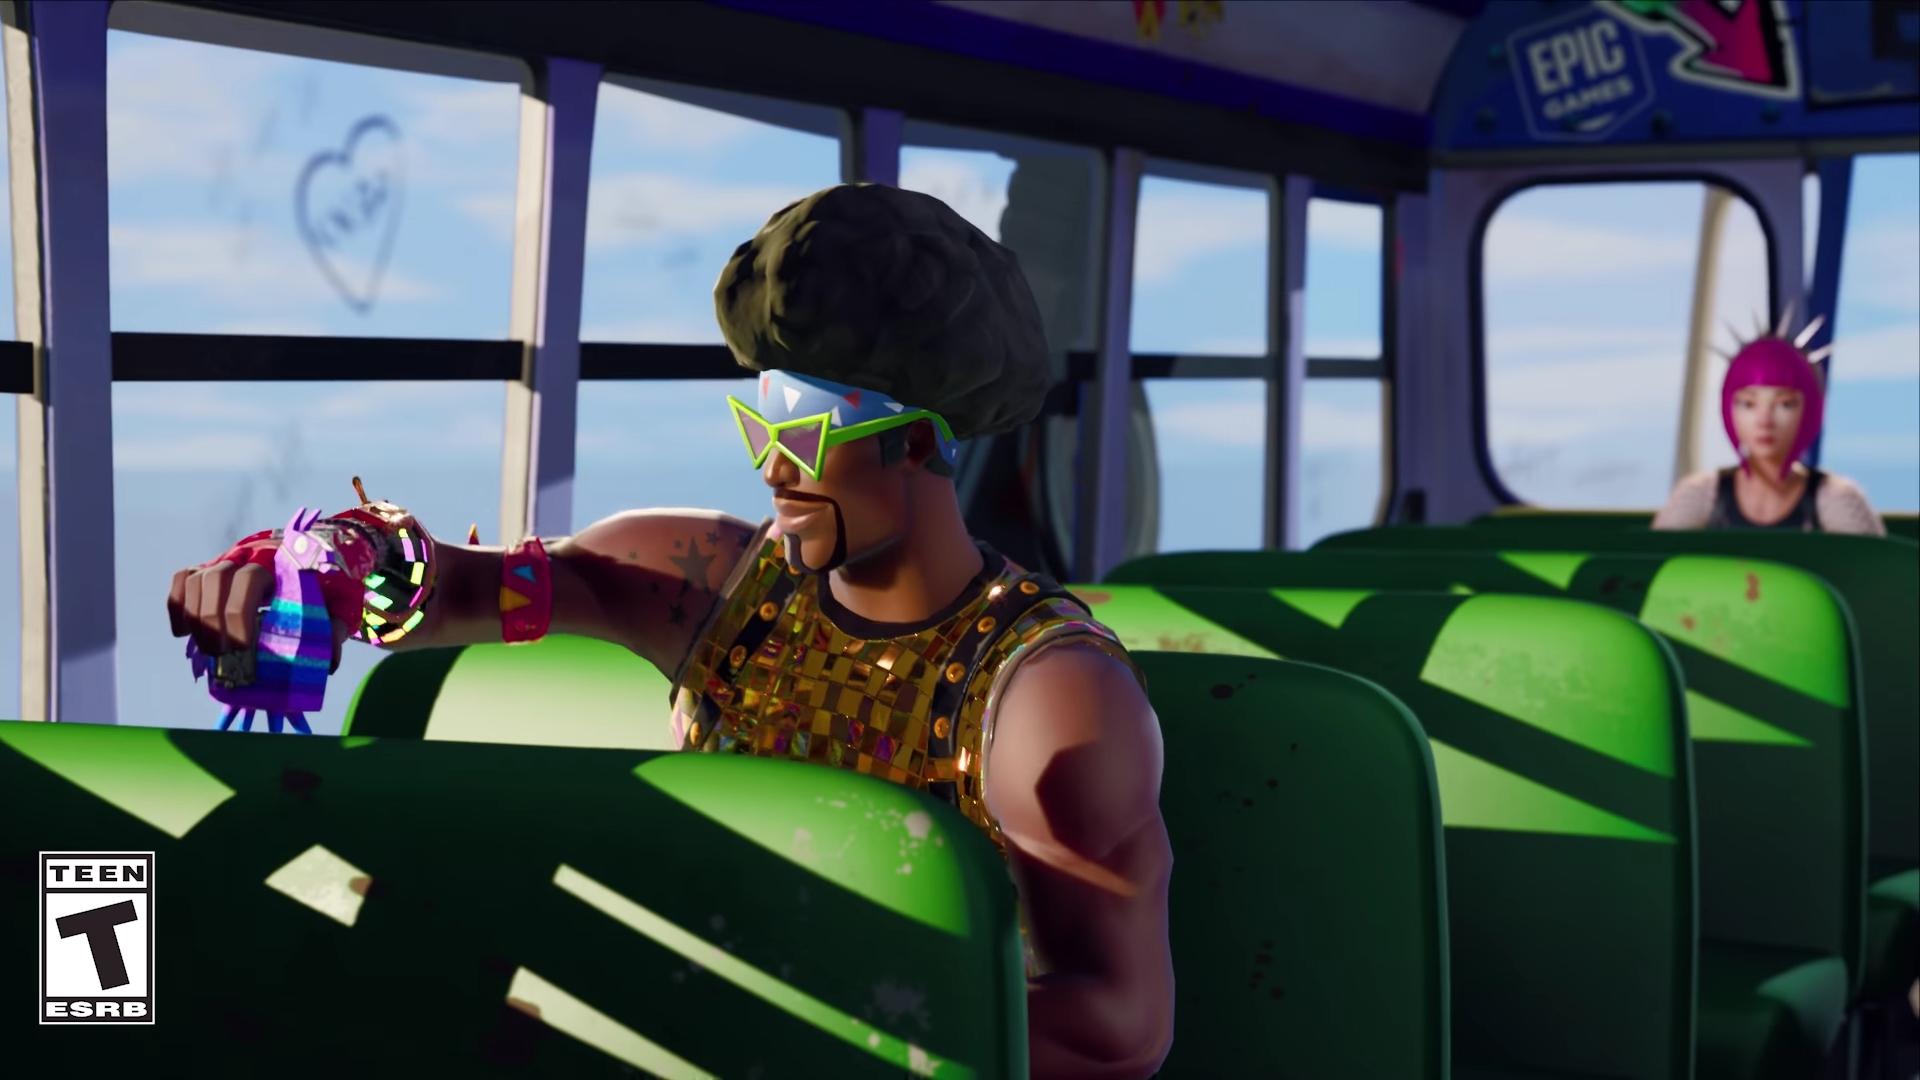 How do 100 players fit inside the Battle Bus then?